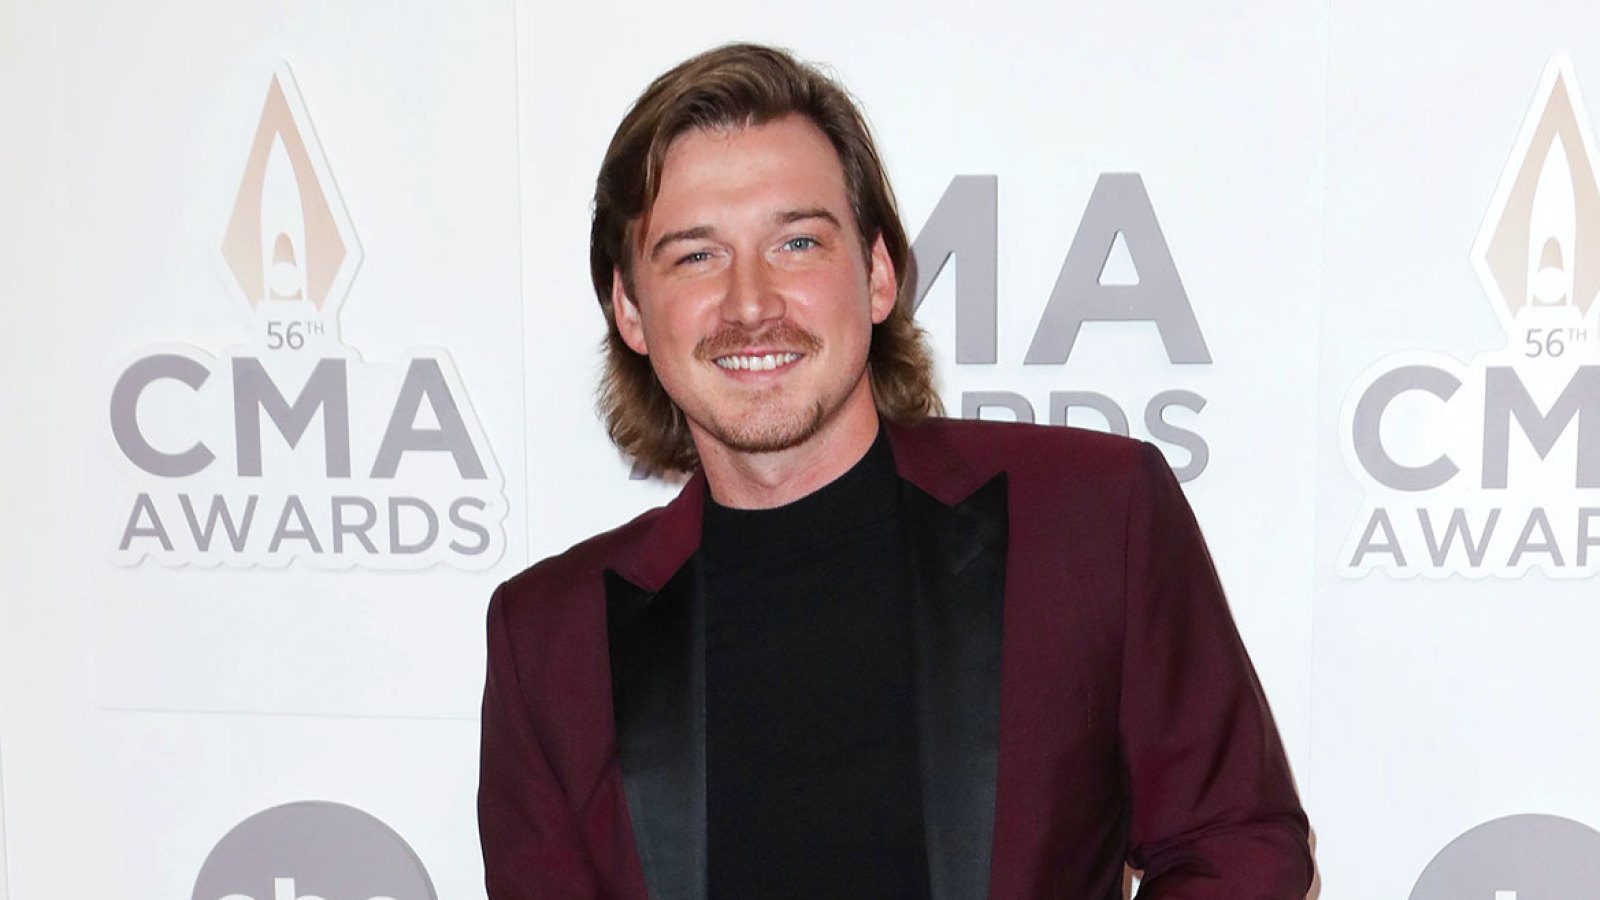 Morgan Wallen Returns to the Stage After Abruptly Canceling Concert